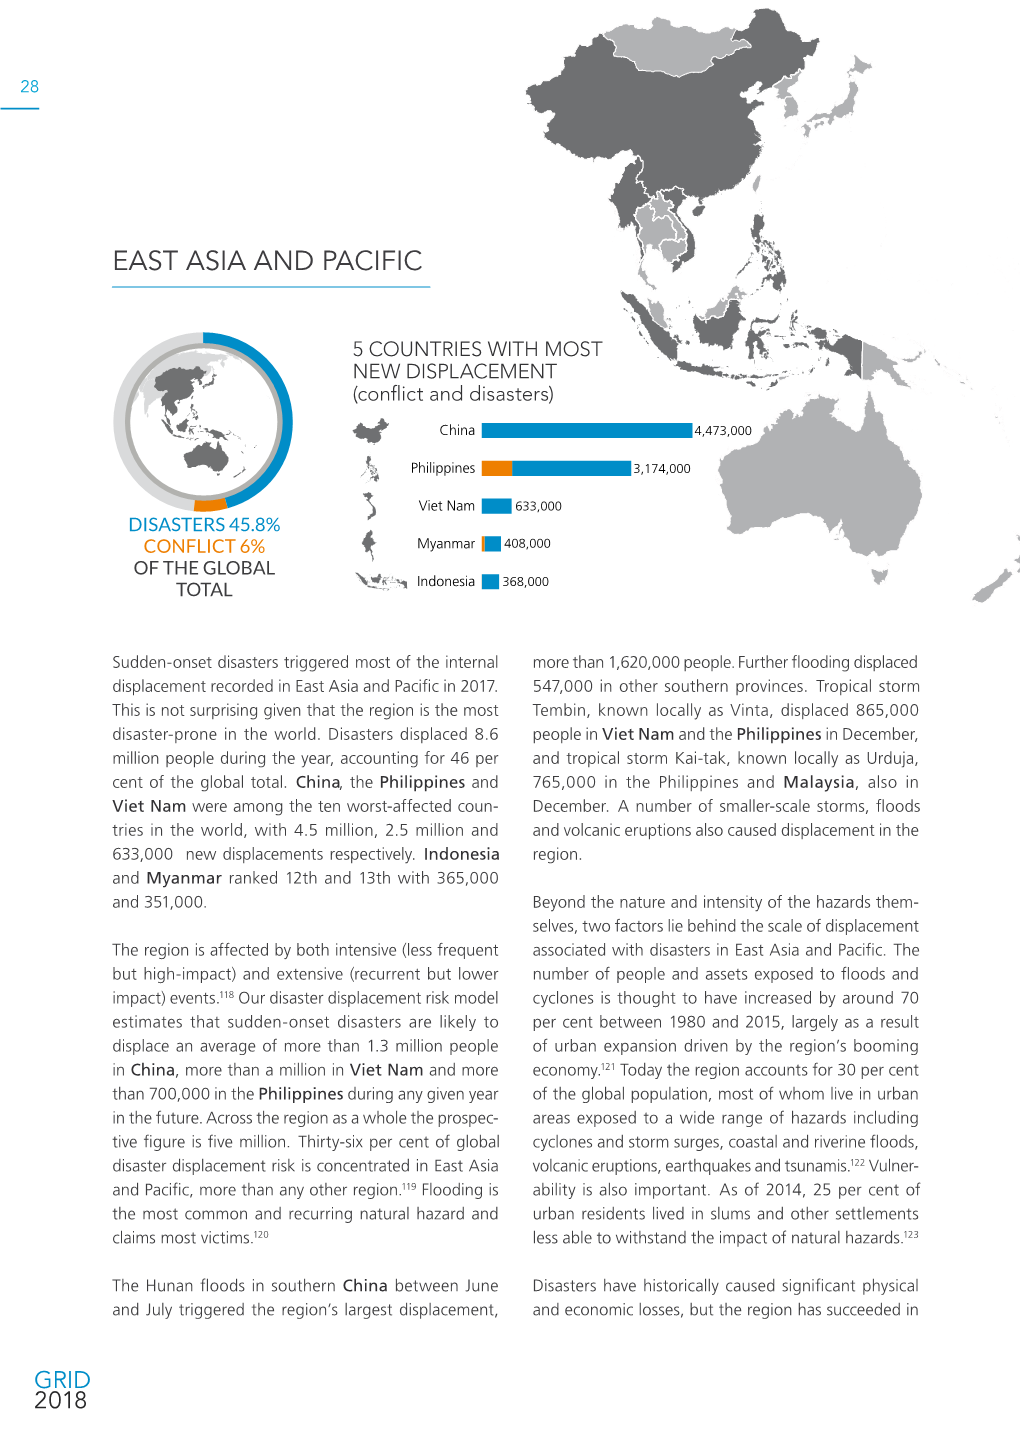 East Asia and Pacific Regional Overview